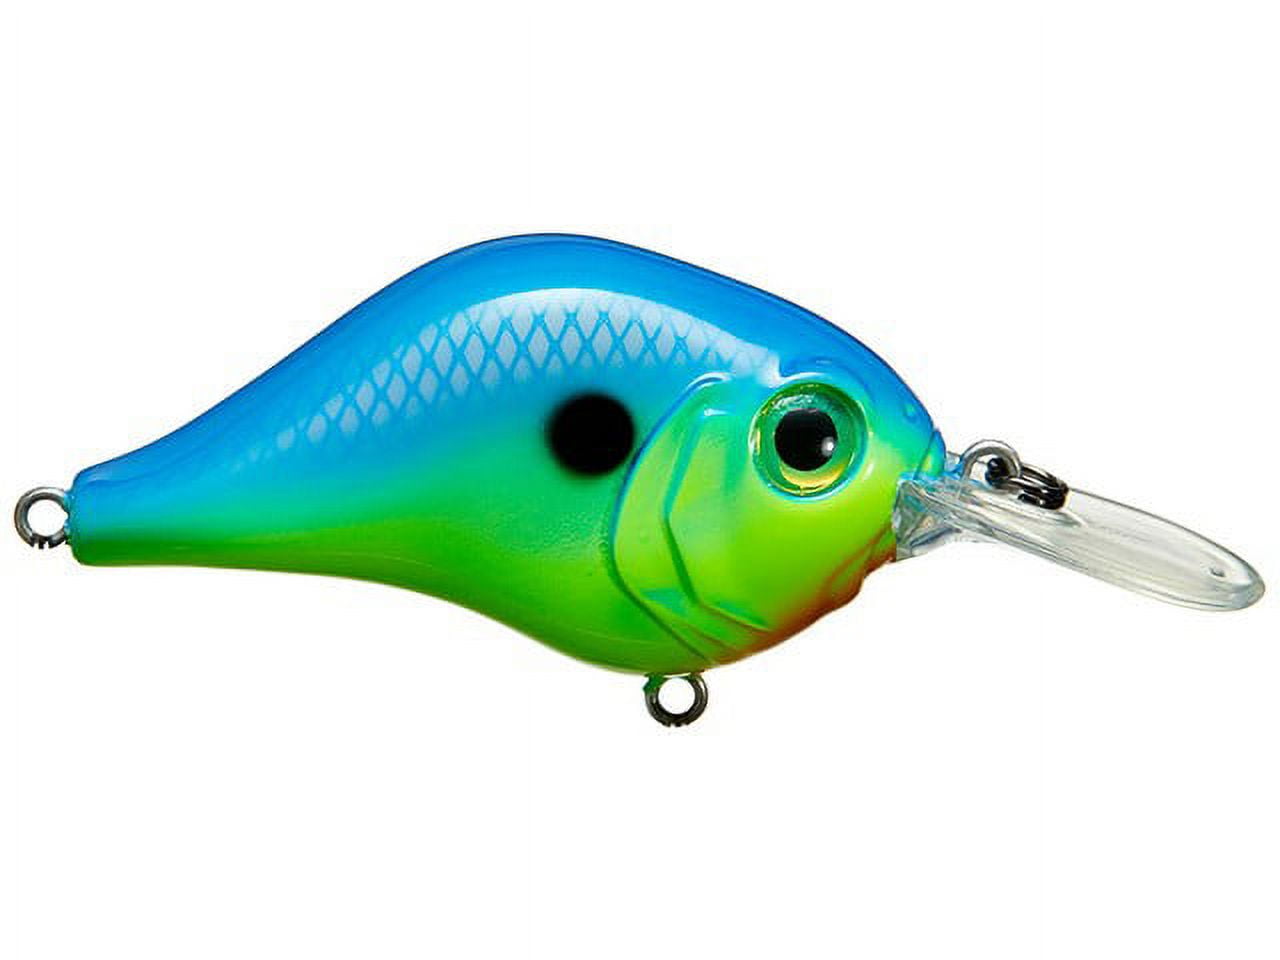 Bill 12MR600 Lewis 2.5 3/4 Oz 12' Blue Chartreuse Fishing Lure